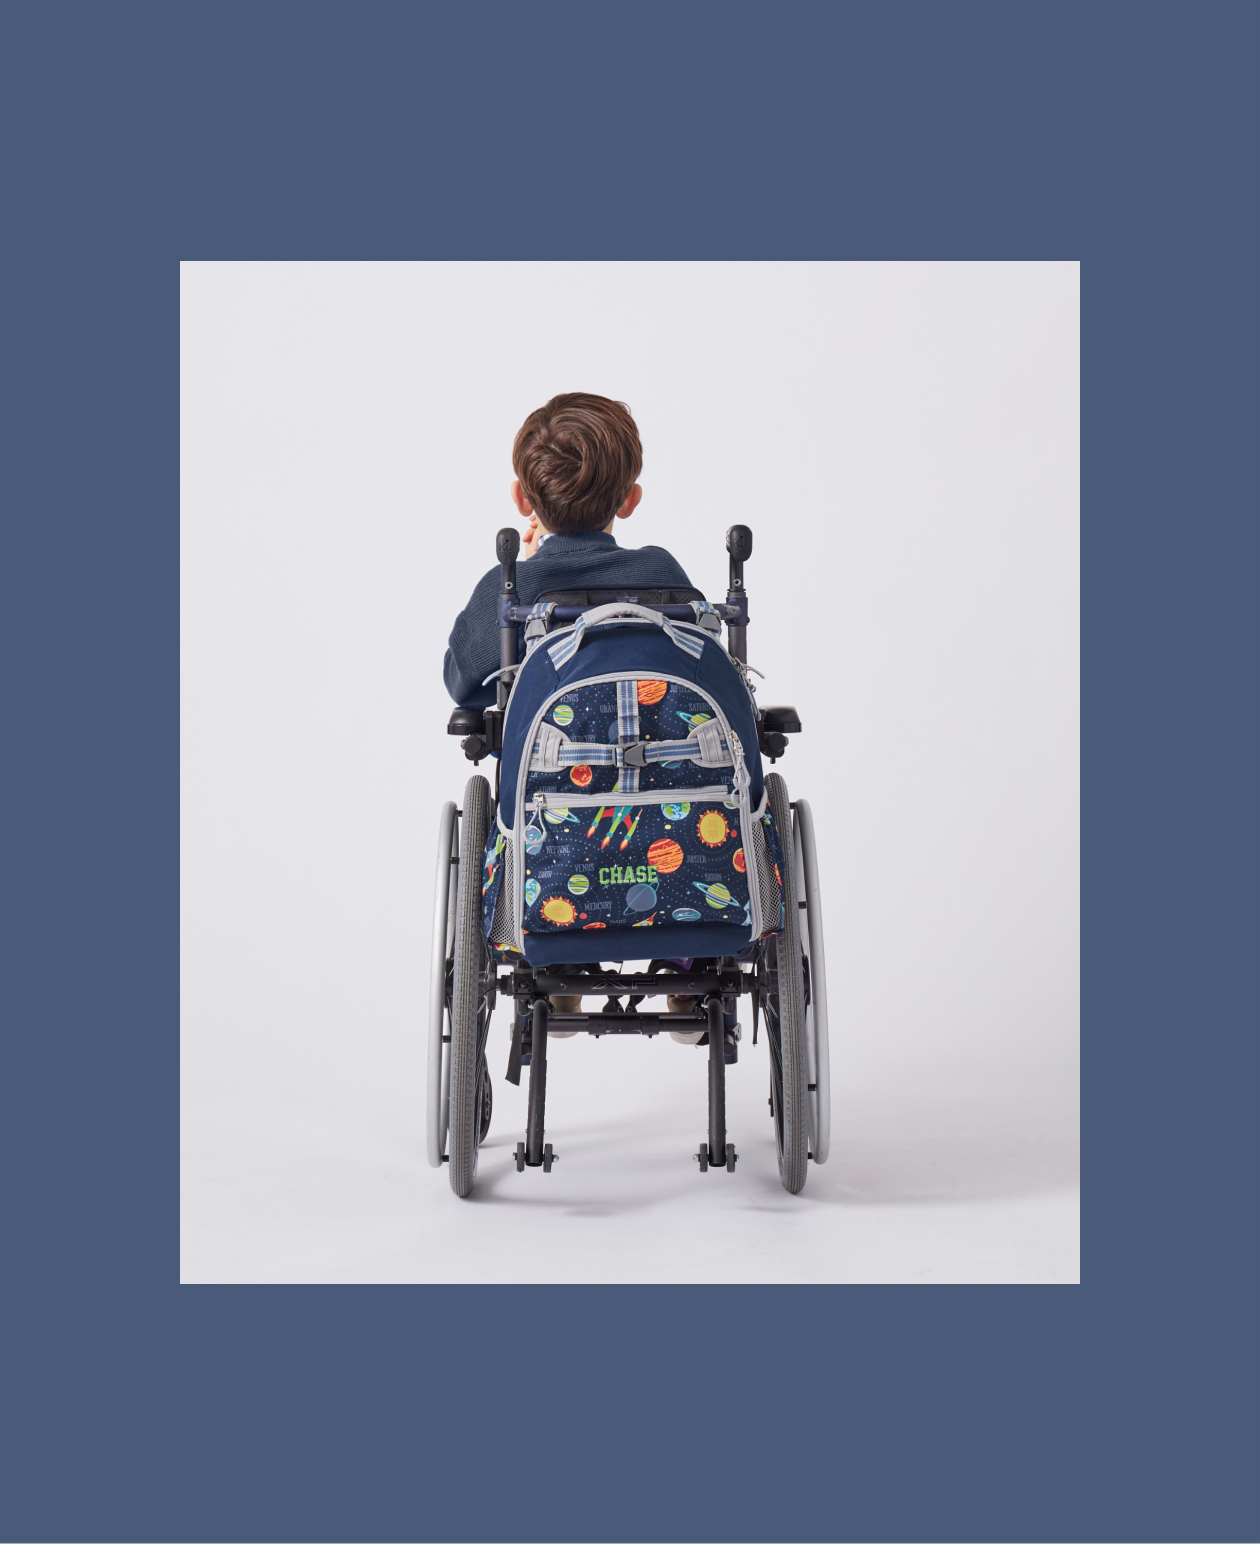 Image shows the back profile a young boy sitting in a wheelchair. Attached to the wheelchair is a Pottery Barn Kids Mackenzie Adaptive Backpack in Solar System print and embroidered with a name.